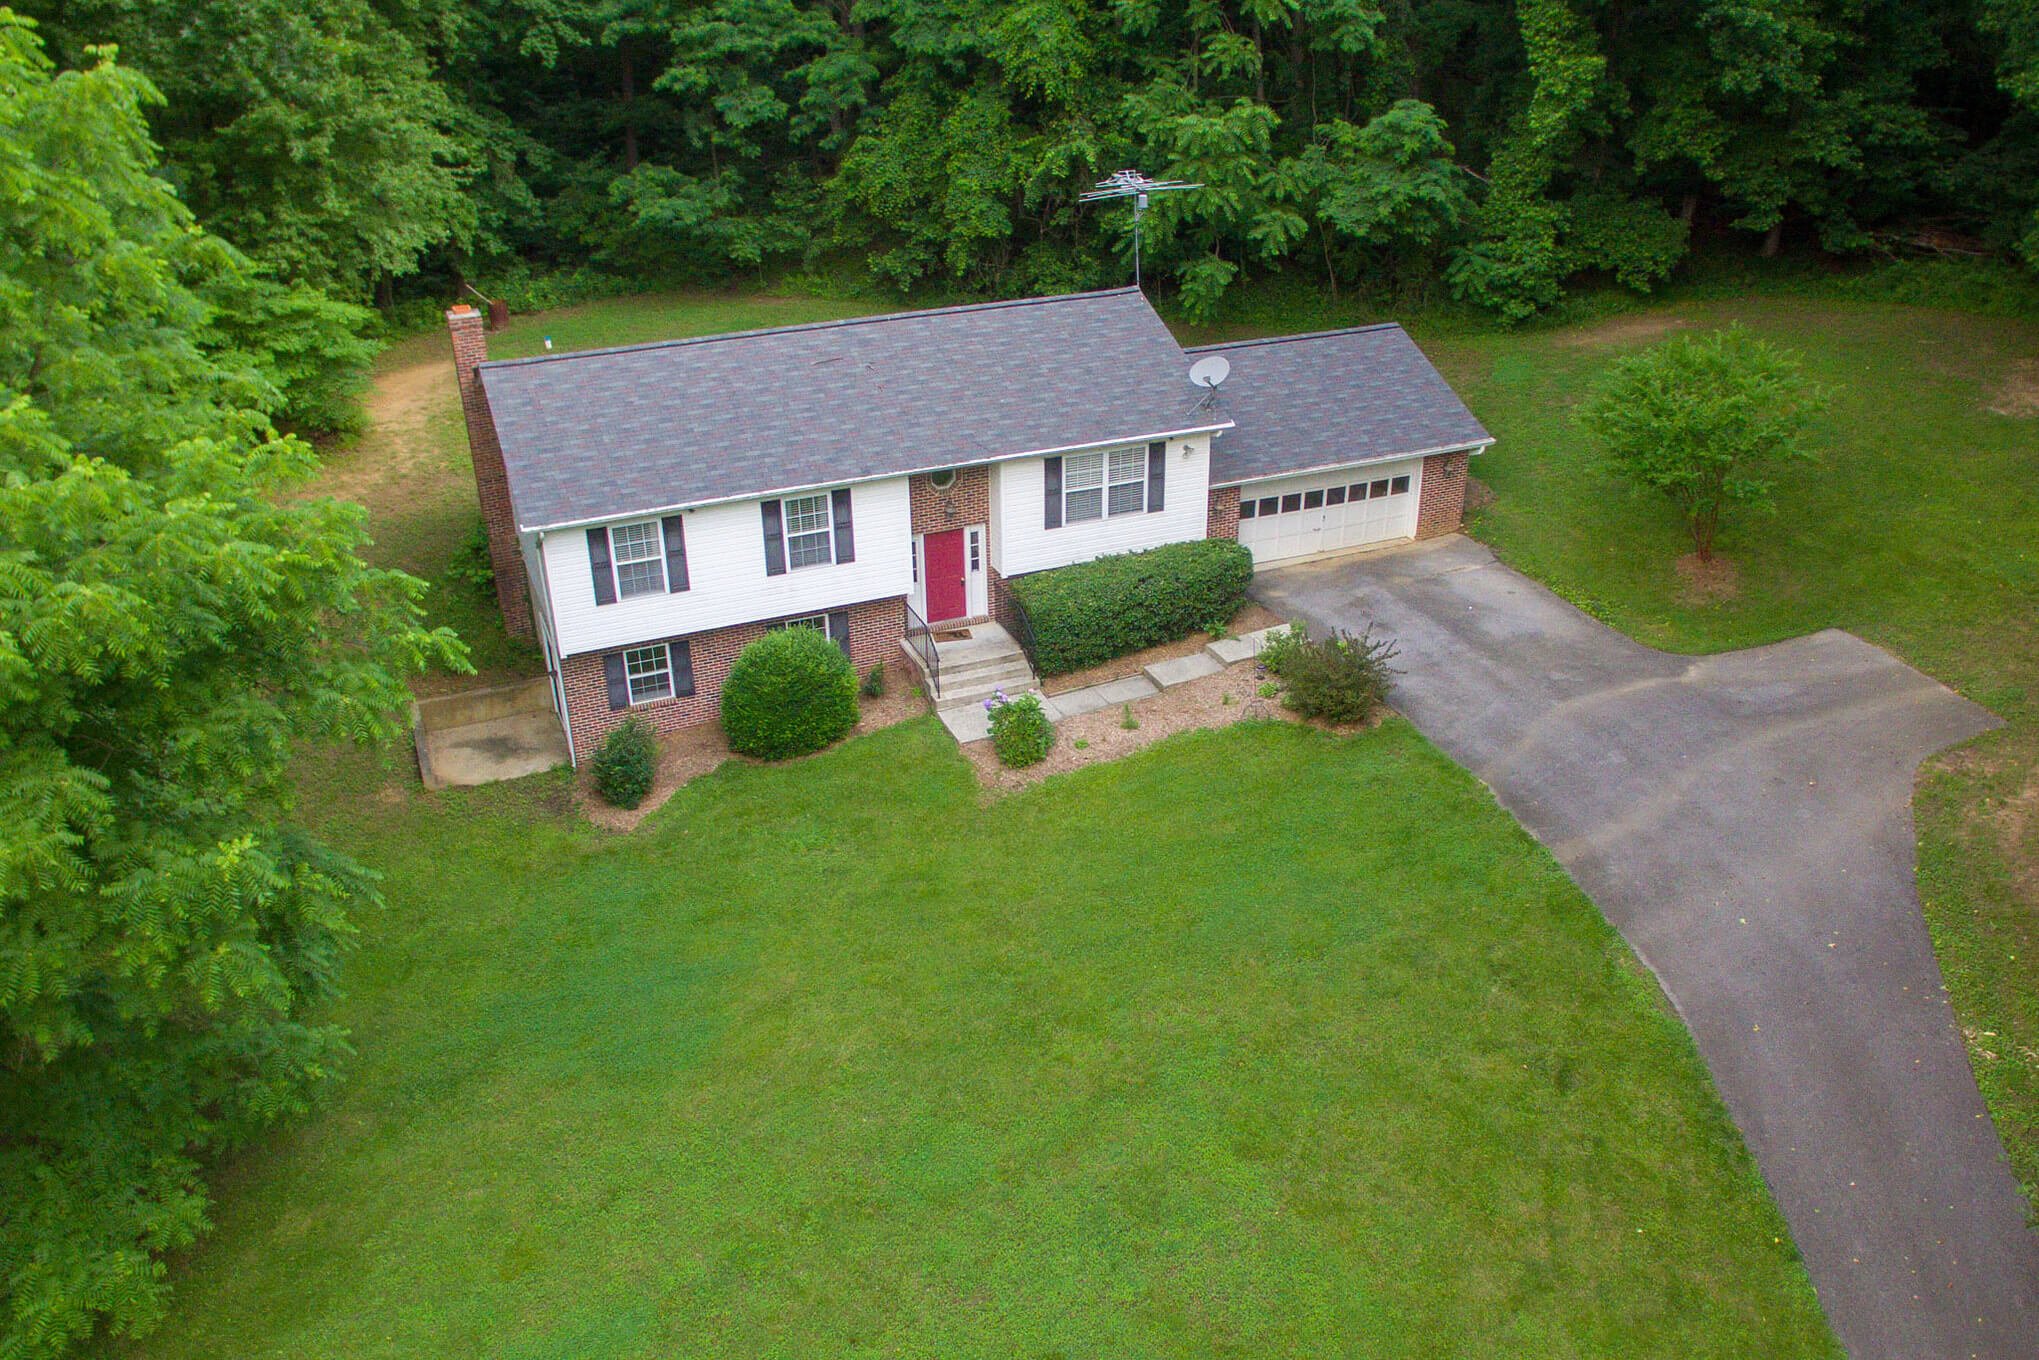 Areal photograph of a 2 story home with large yard and long driveway.